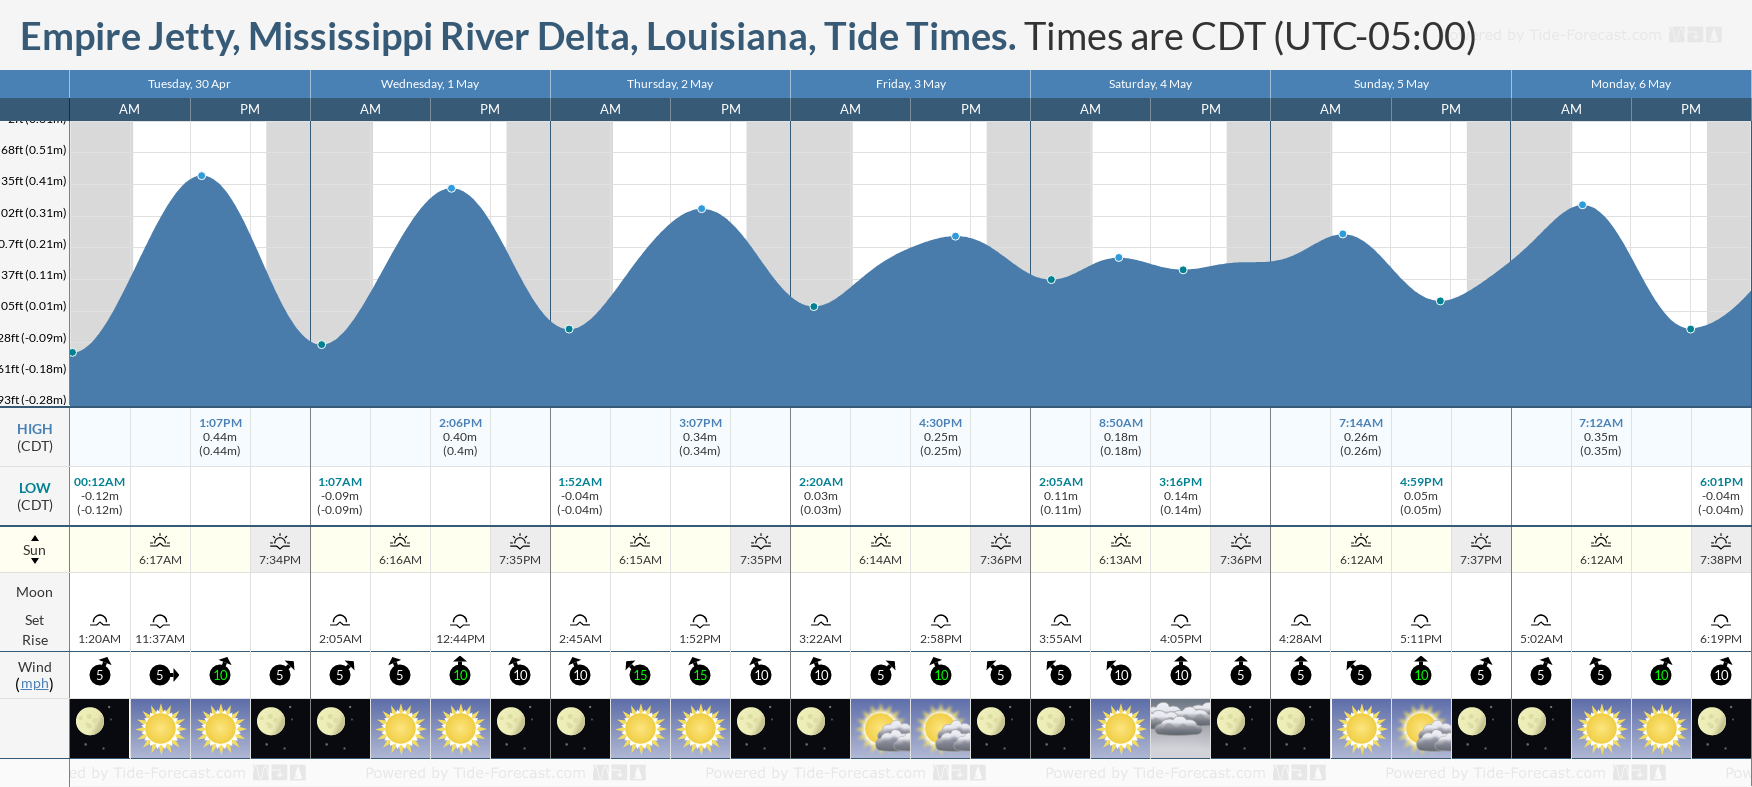 Empire Jetty, Mississippi River Delta, Louisiana Tide Chart including high and low tide tide times for the next 7 days